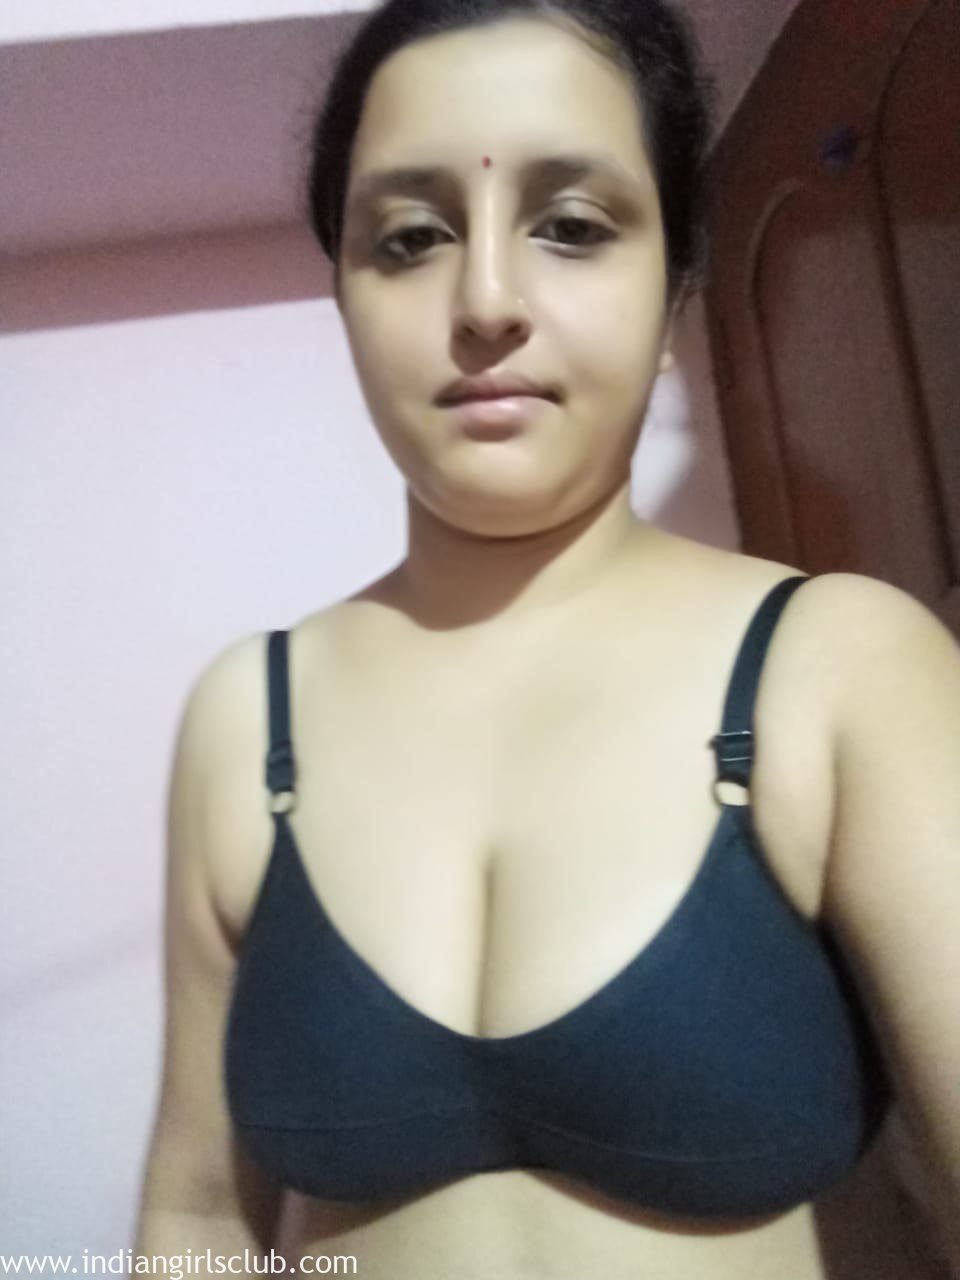 big-tits-bengali-indian-housewife-ready-for-hot-sex-12 - Indian Girls Club  pic